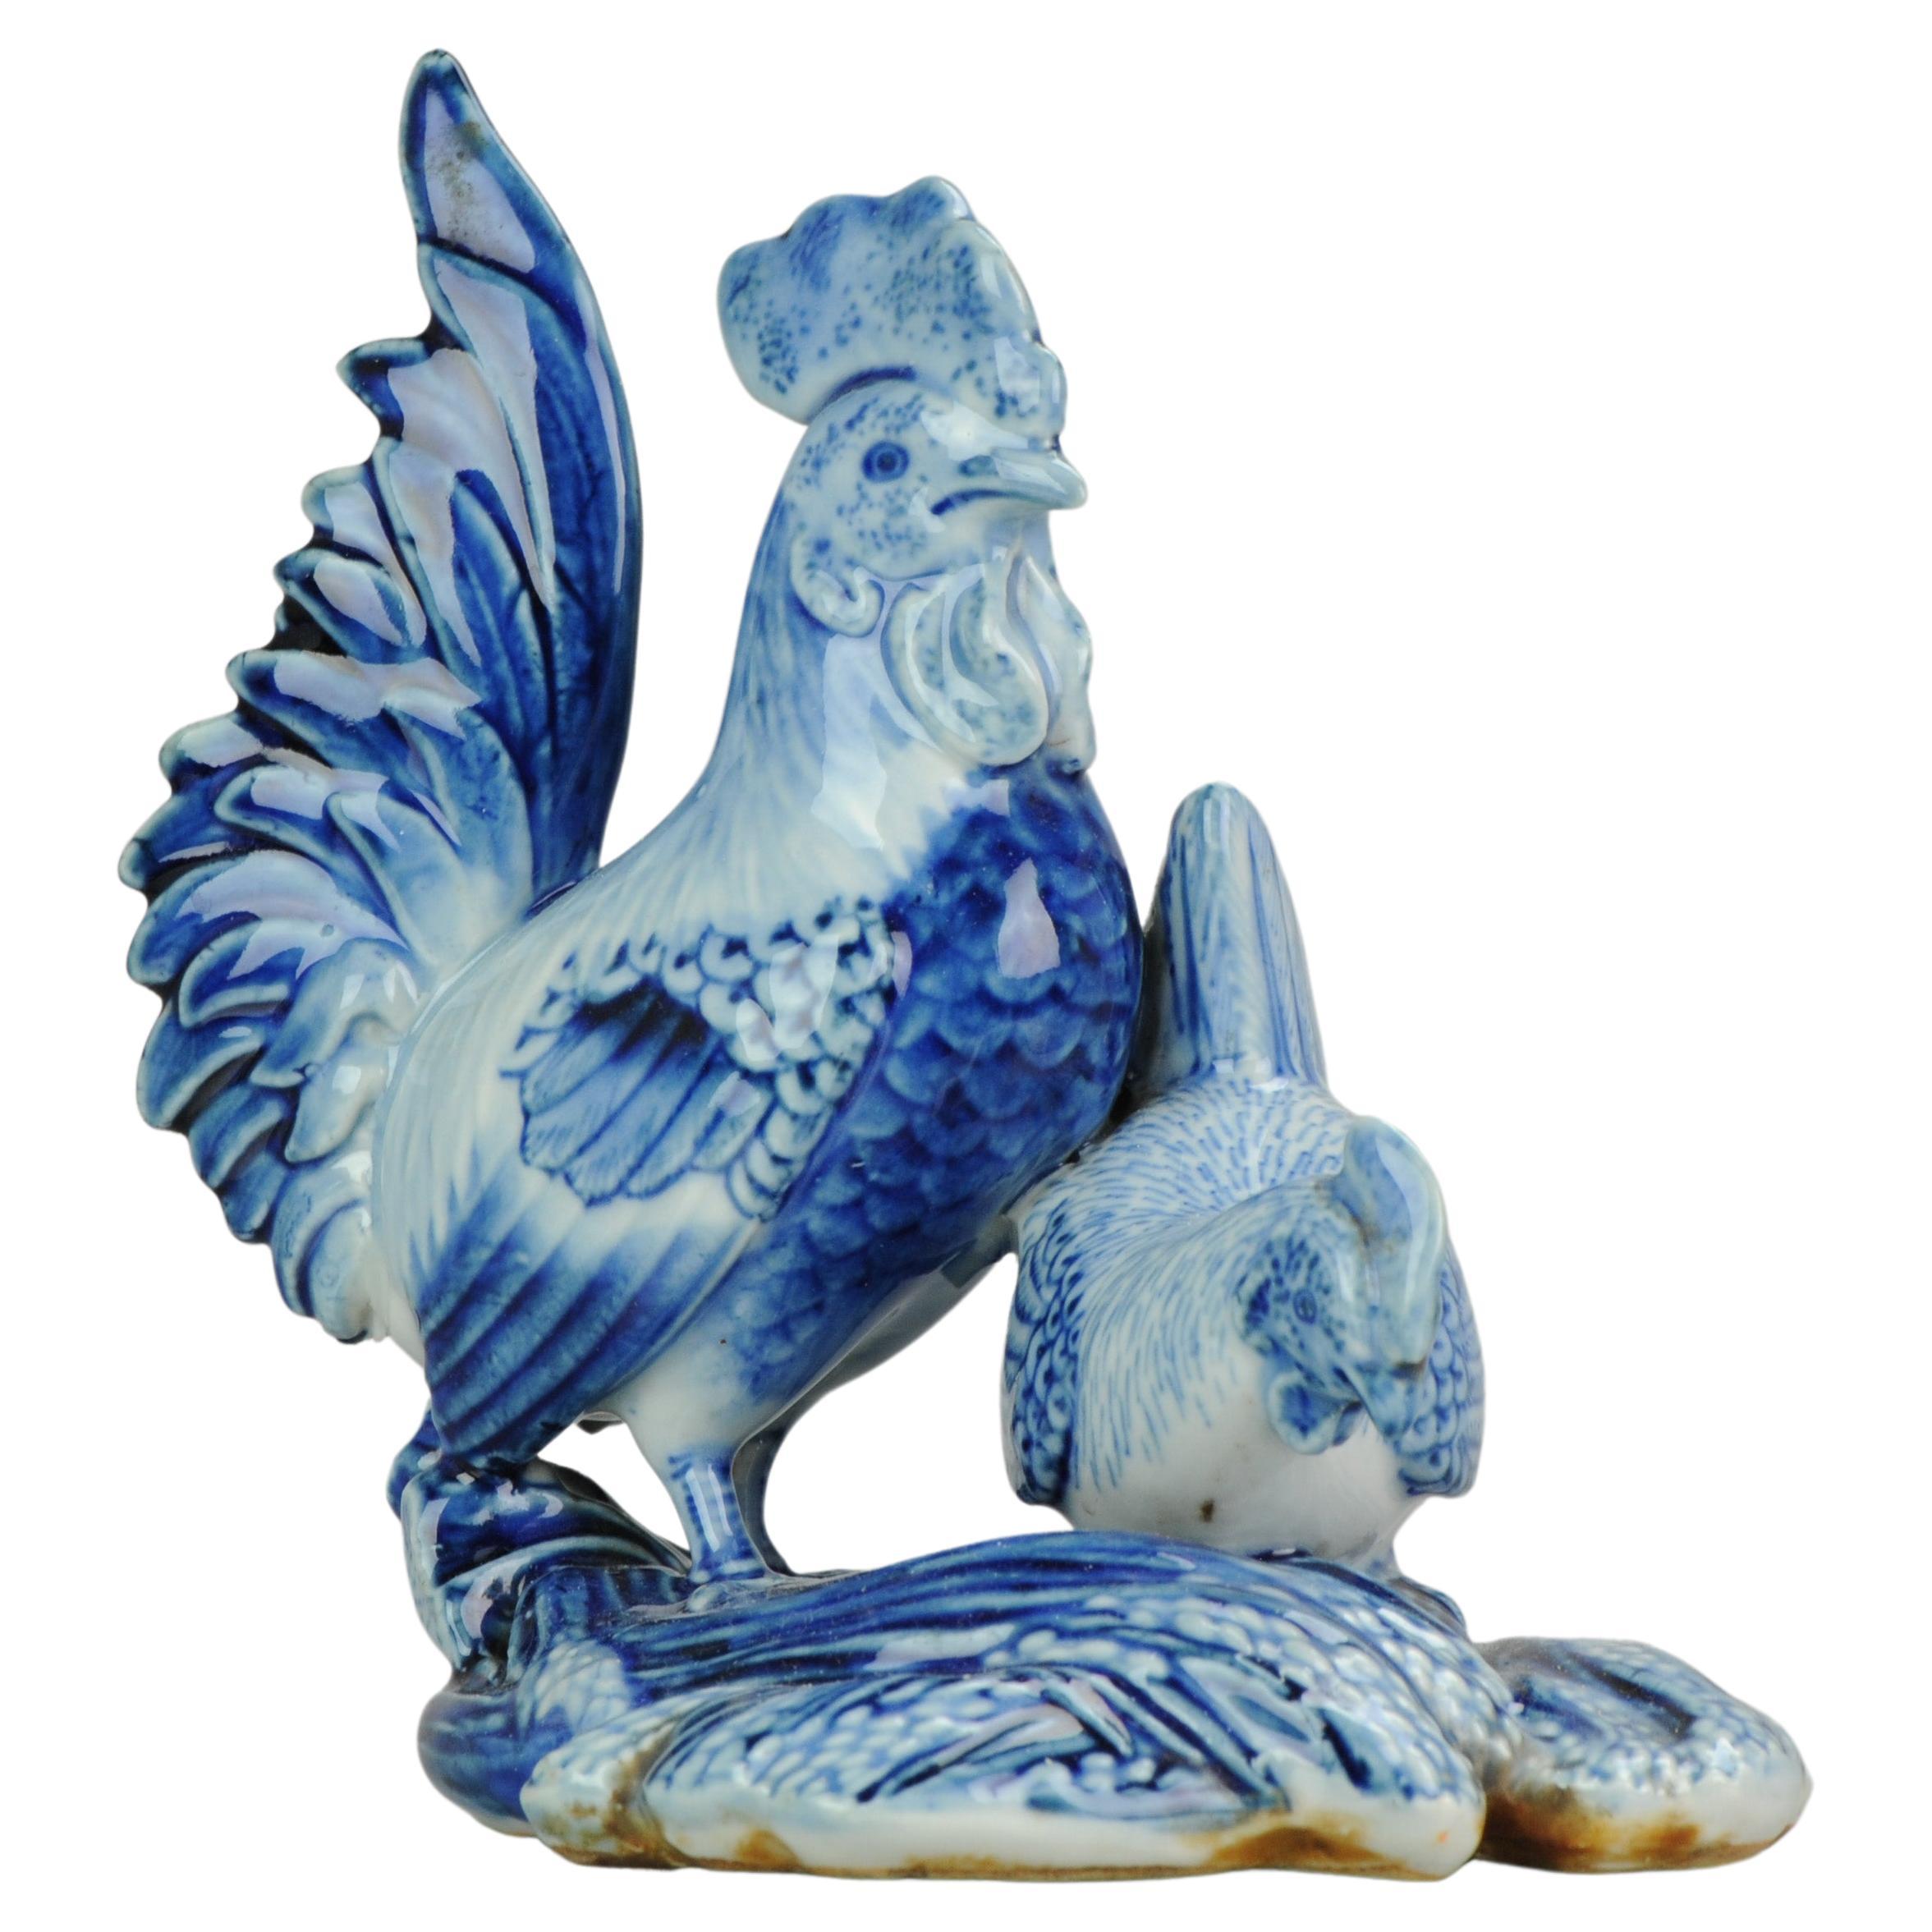 Chinese Porcelain Statue Porcelain Rooster and Chicken, 20-21th Century